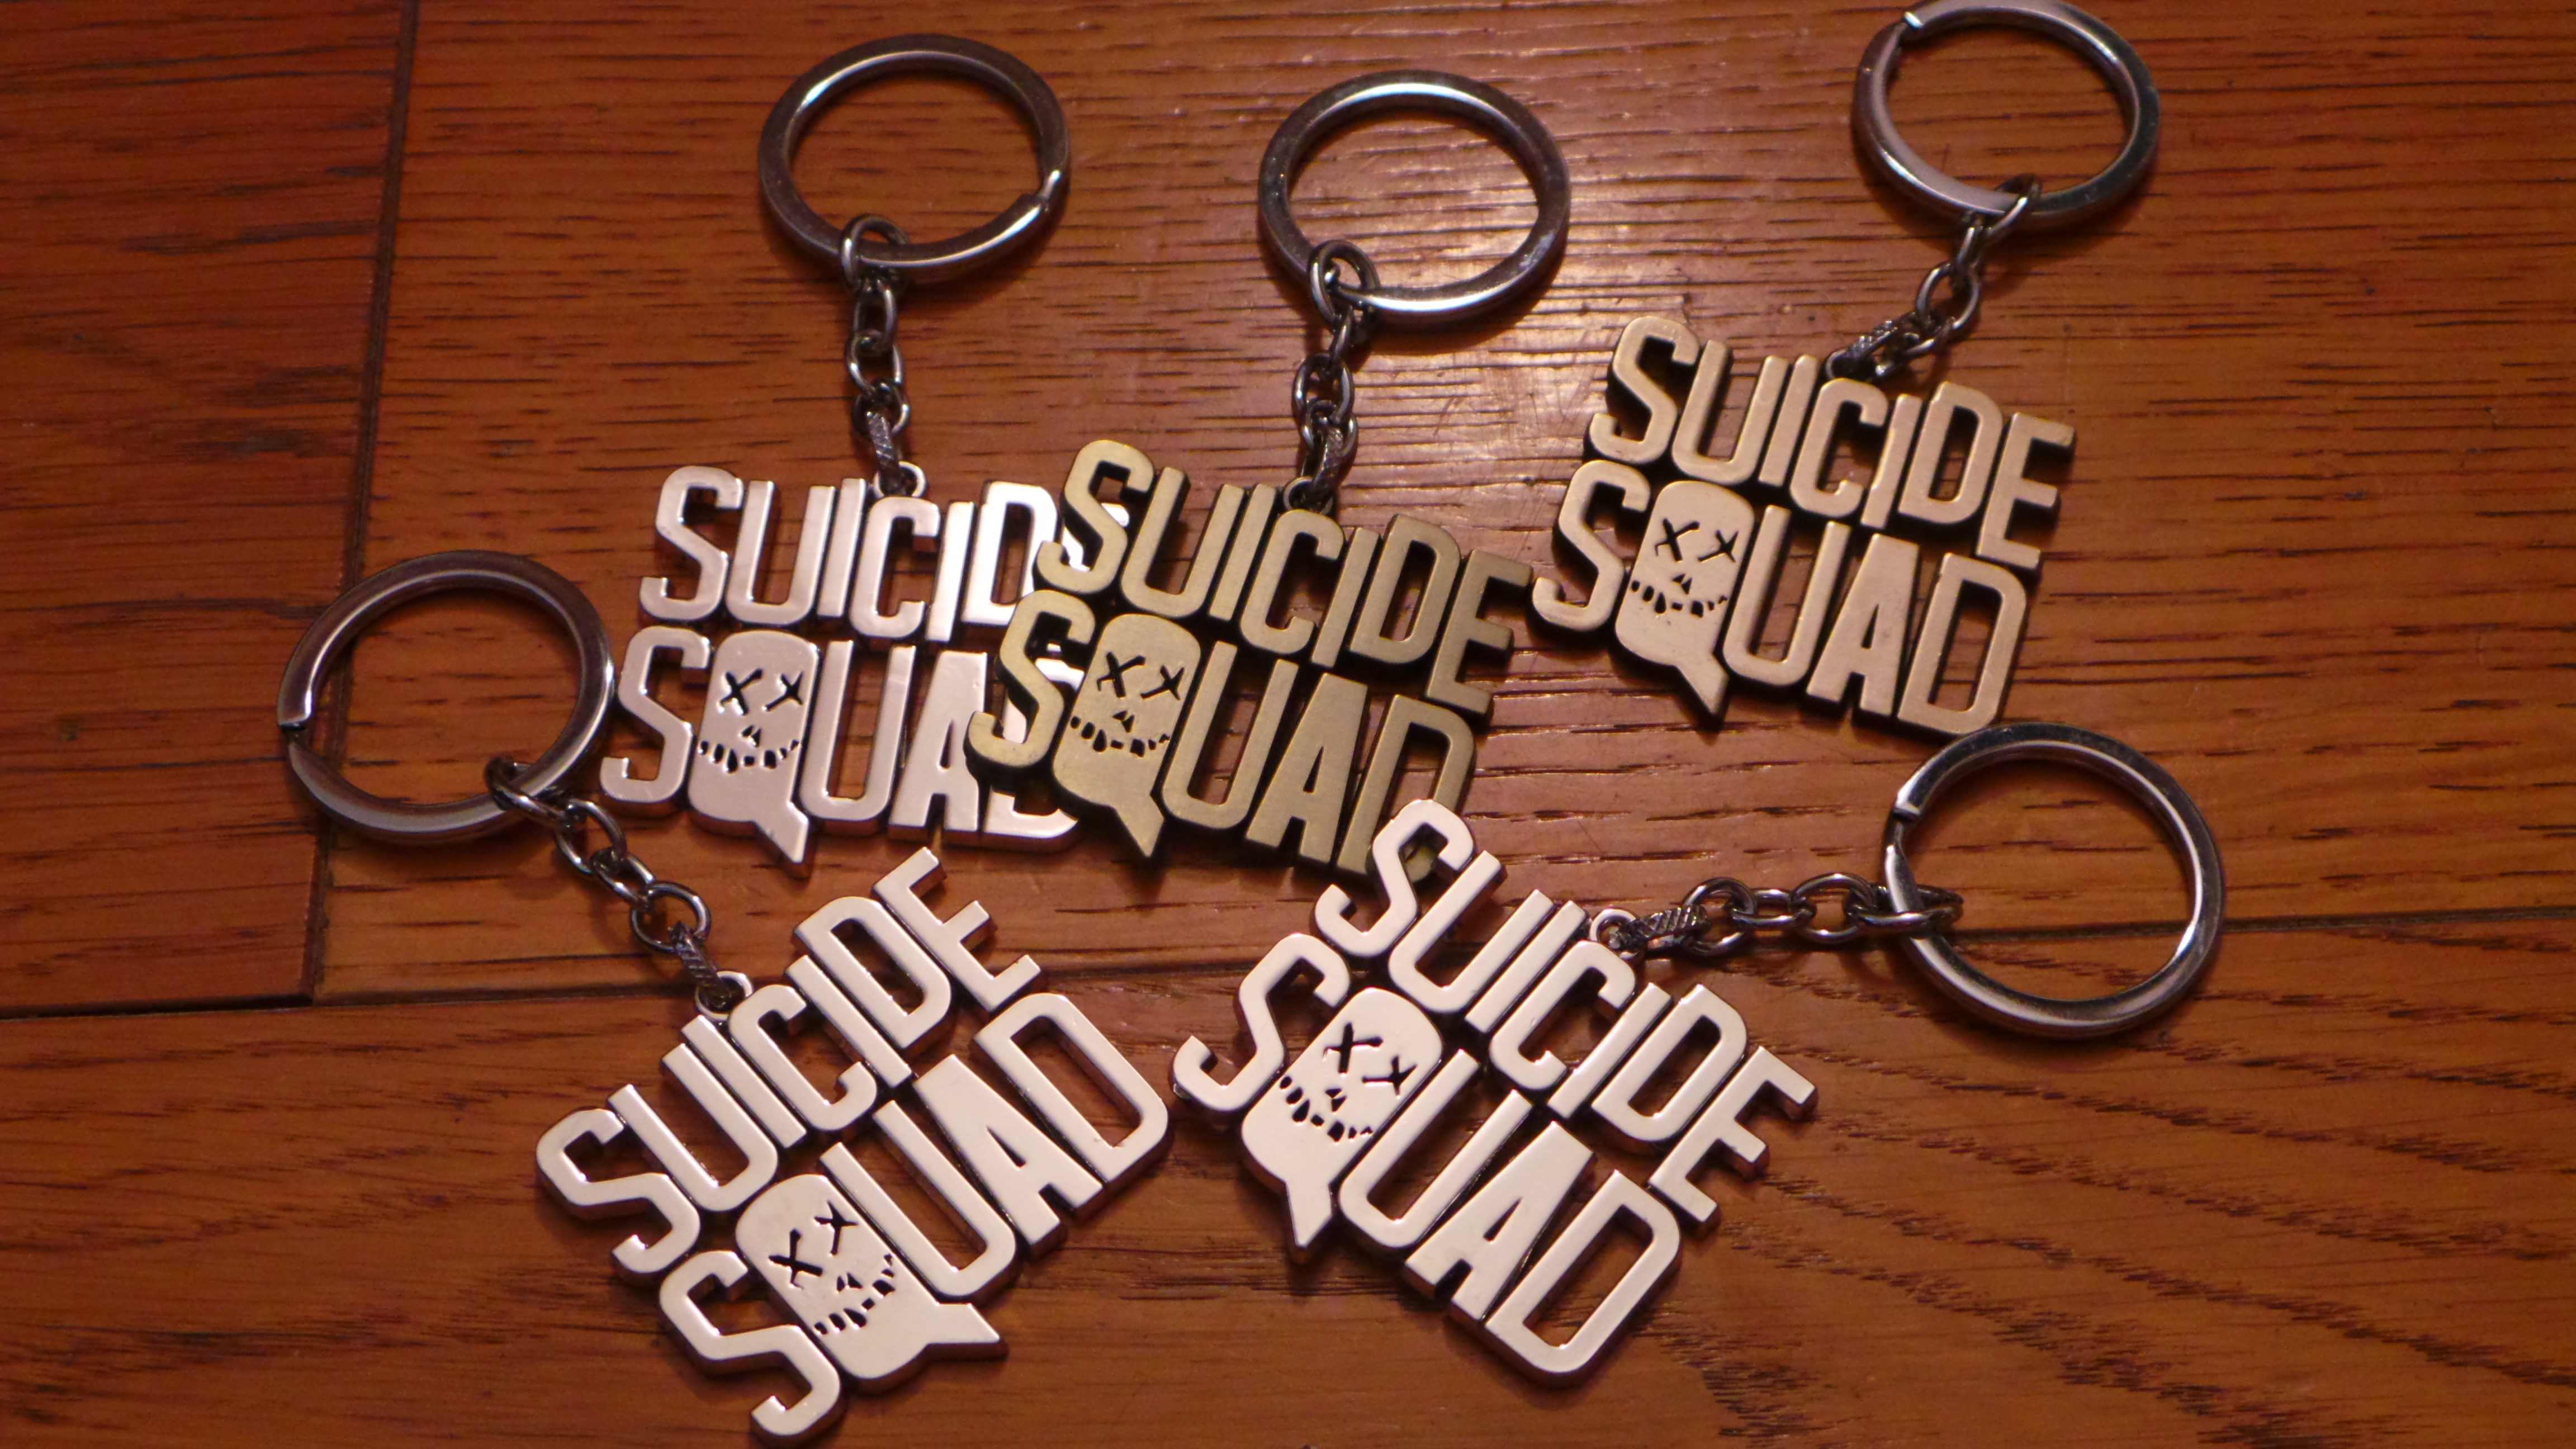 SUICIDE SQUAD - concours Go with the Blog porte clés à gagner logo Suicide Squad film Jared Leto - Go with the Blog 20120104_011916